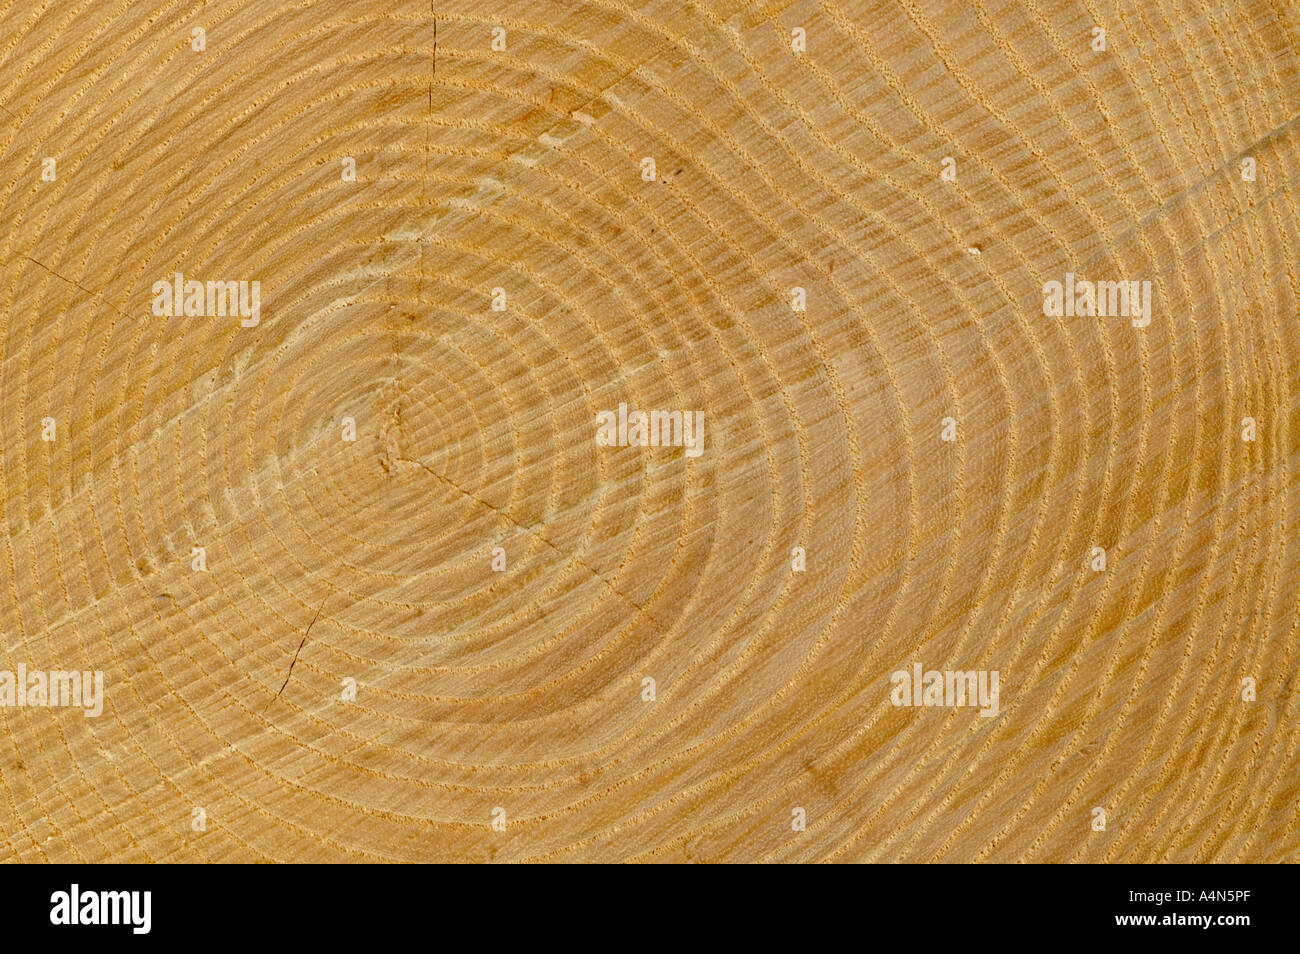 Growth rings on cross section of tree trunk Stock Photo